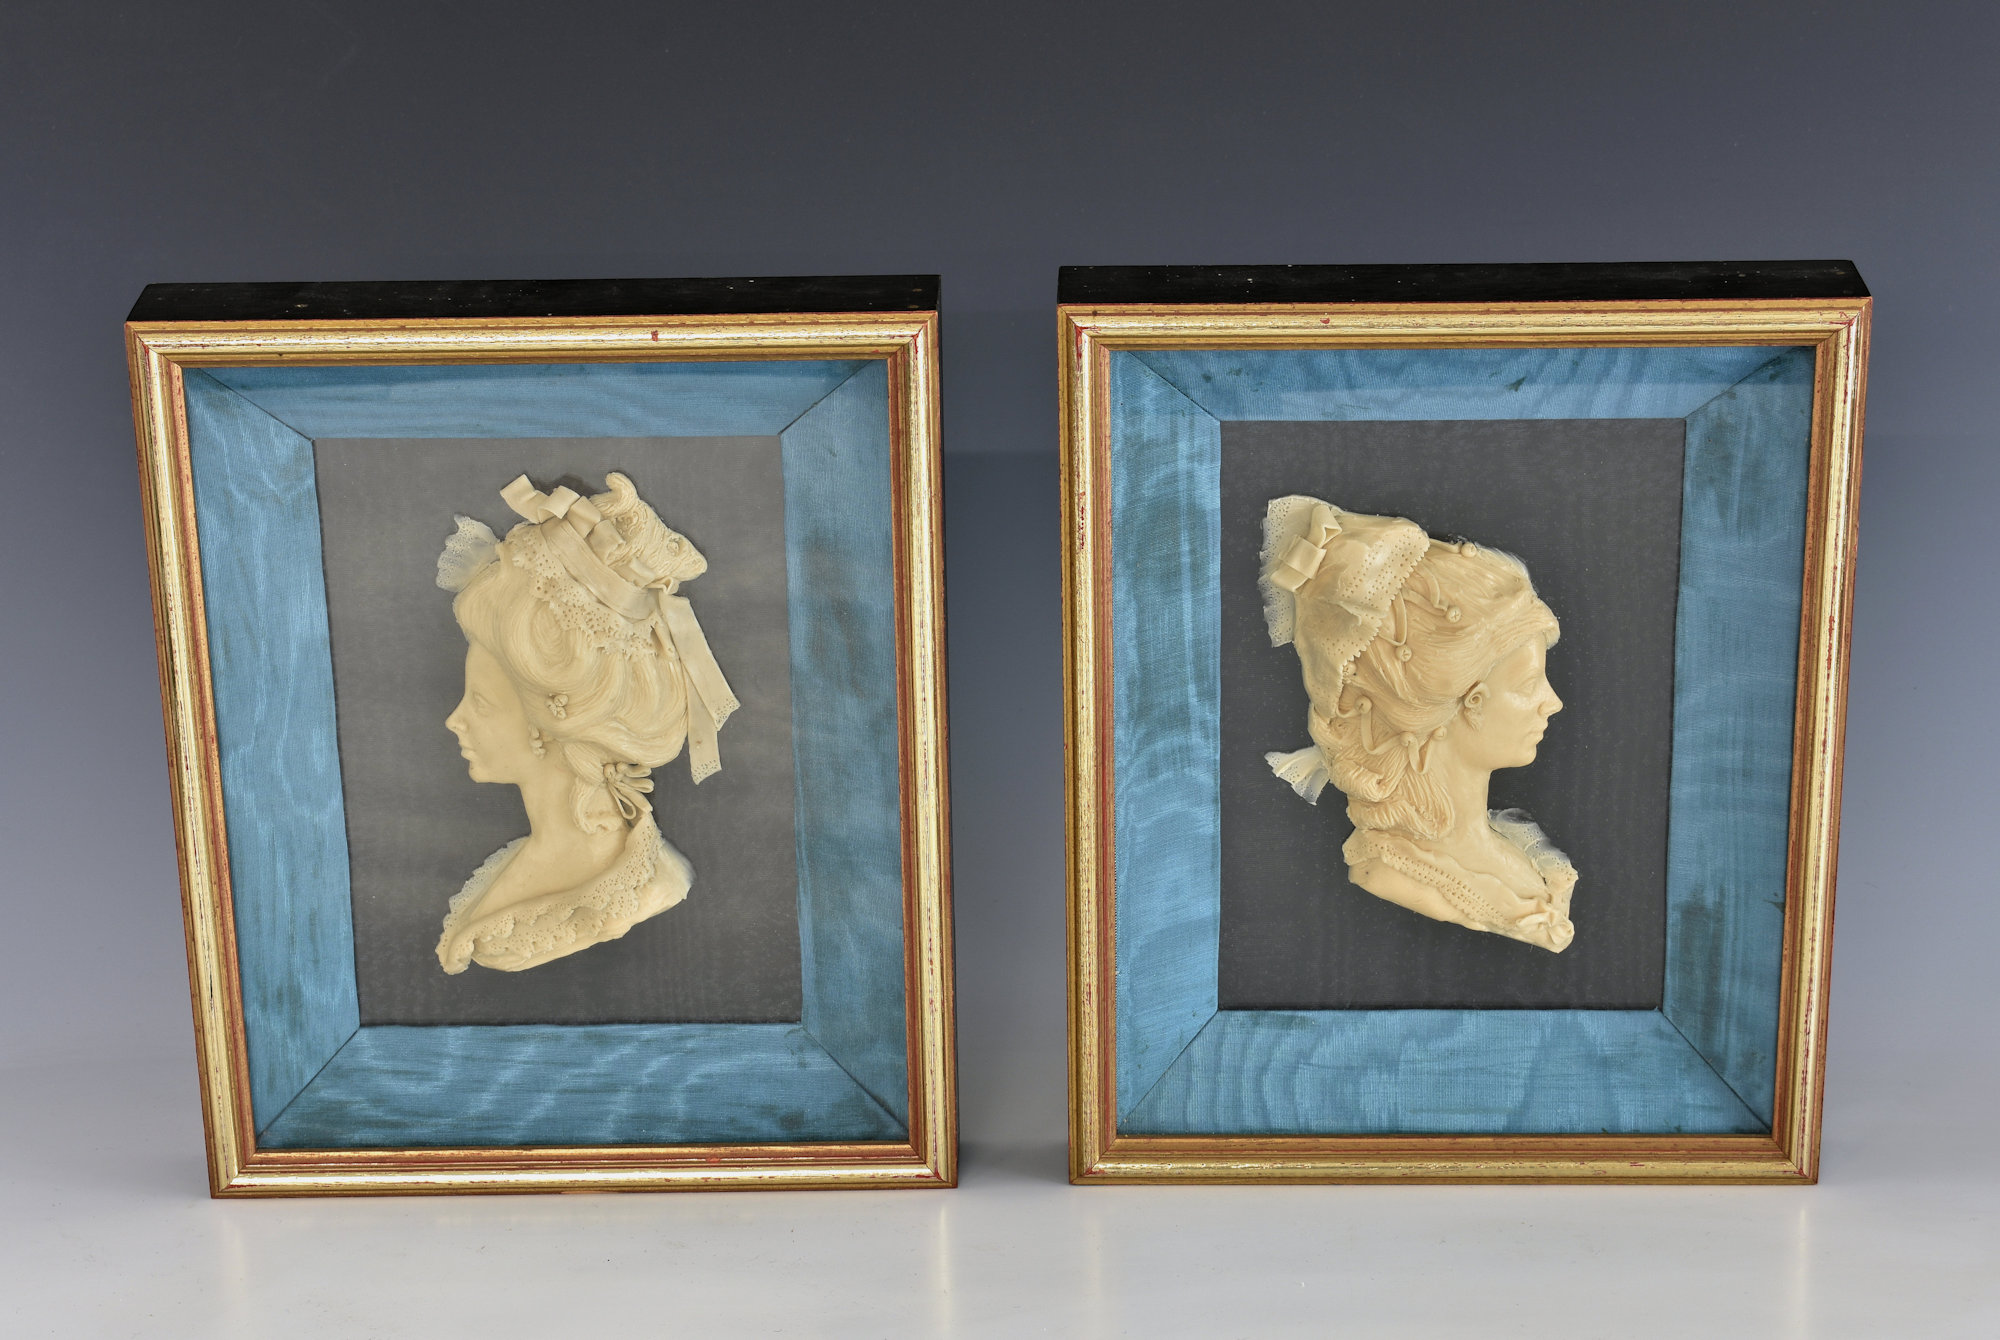 A pair of French cased, carved wax silhouette busts of ladies in 18th century dress and